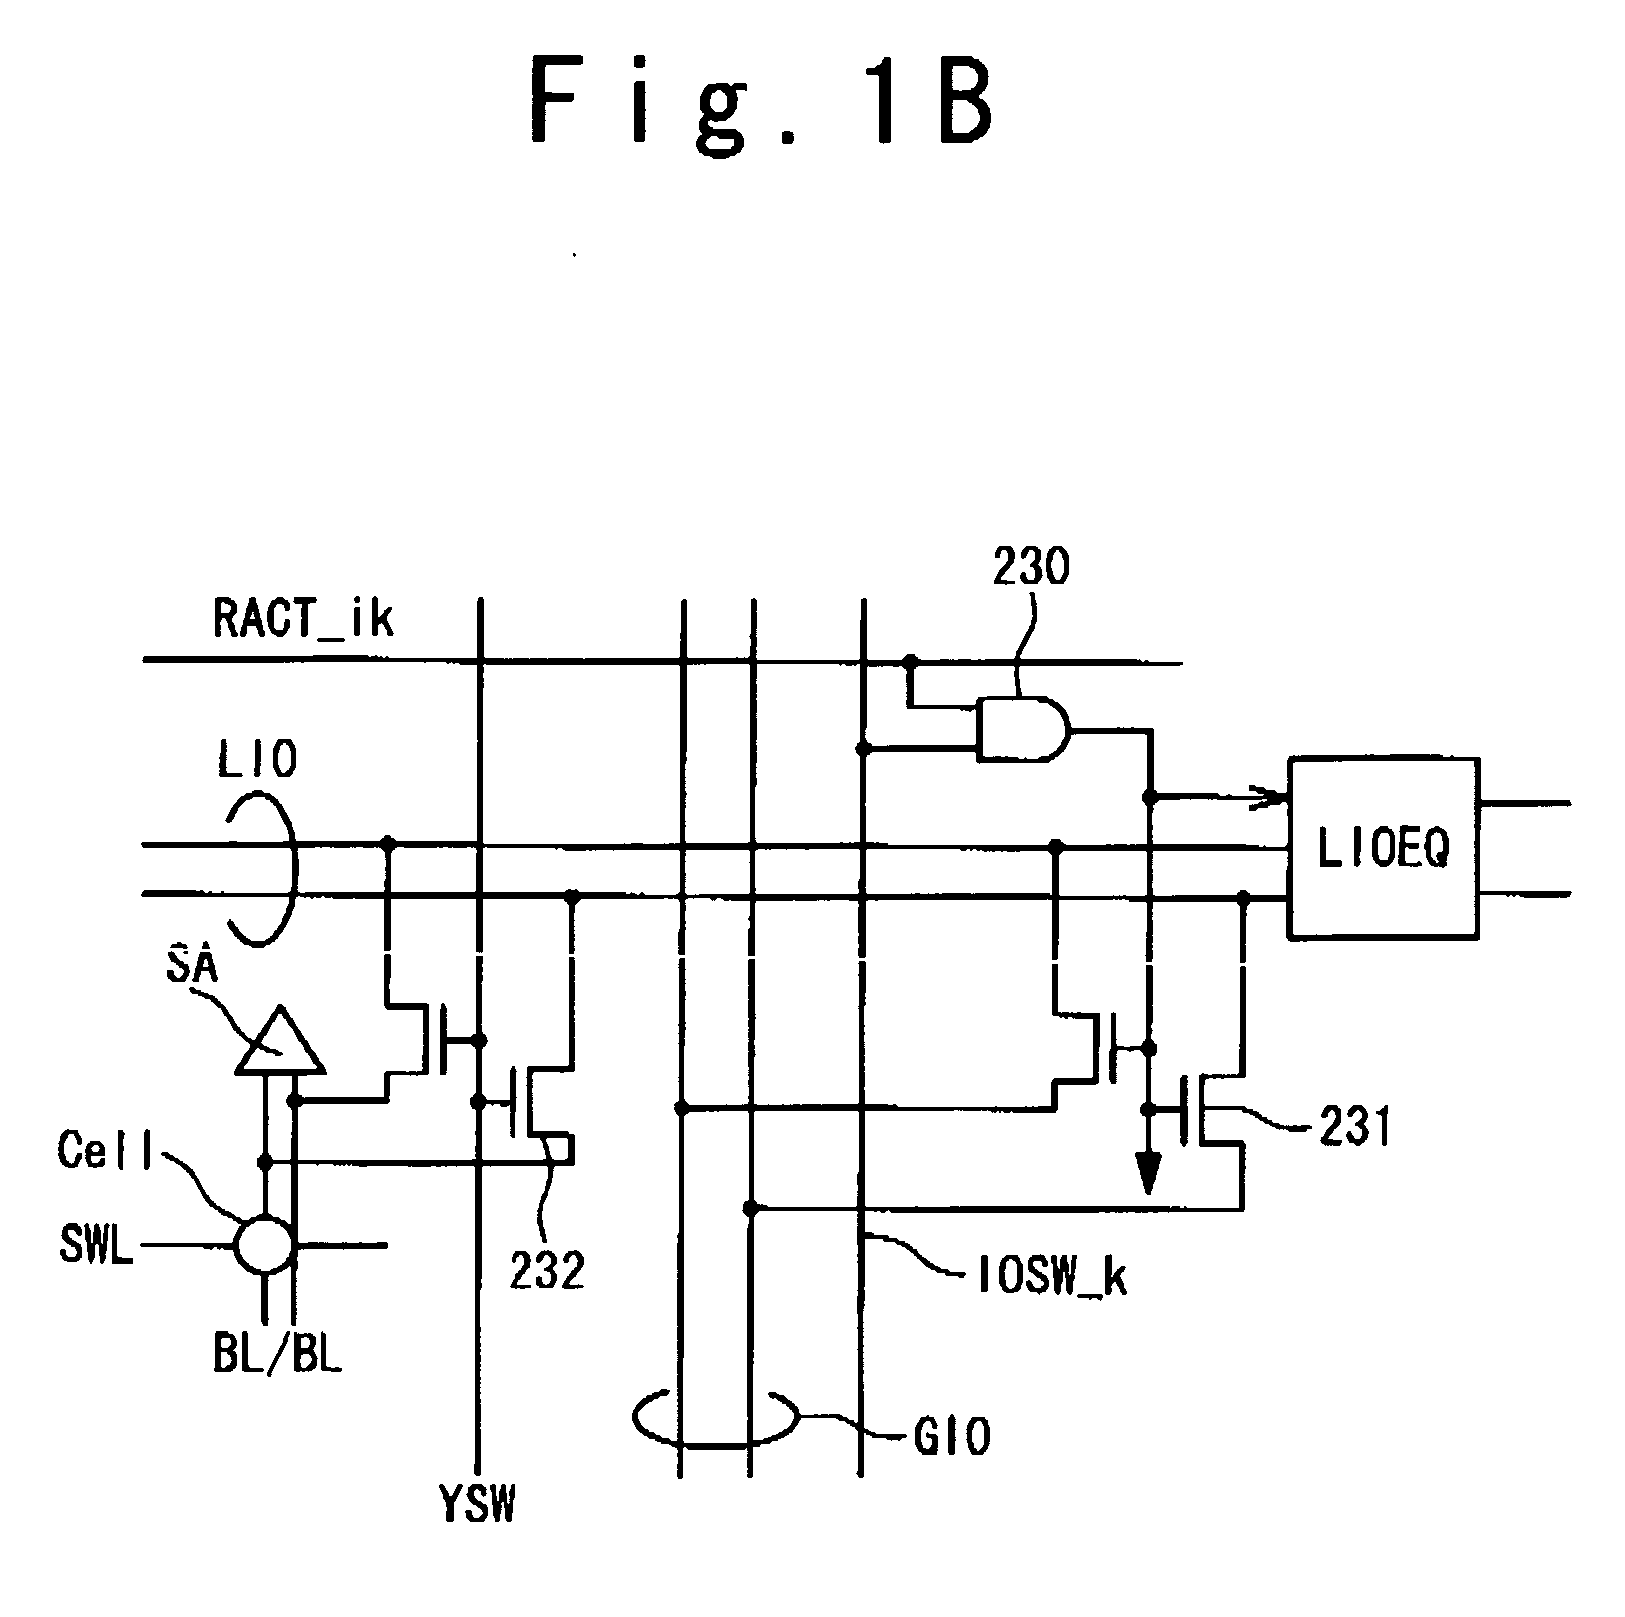 Semiconductor memory device with hierarchical I/O line architecture